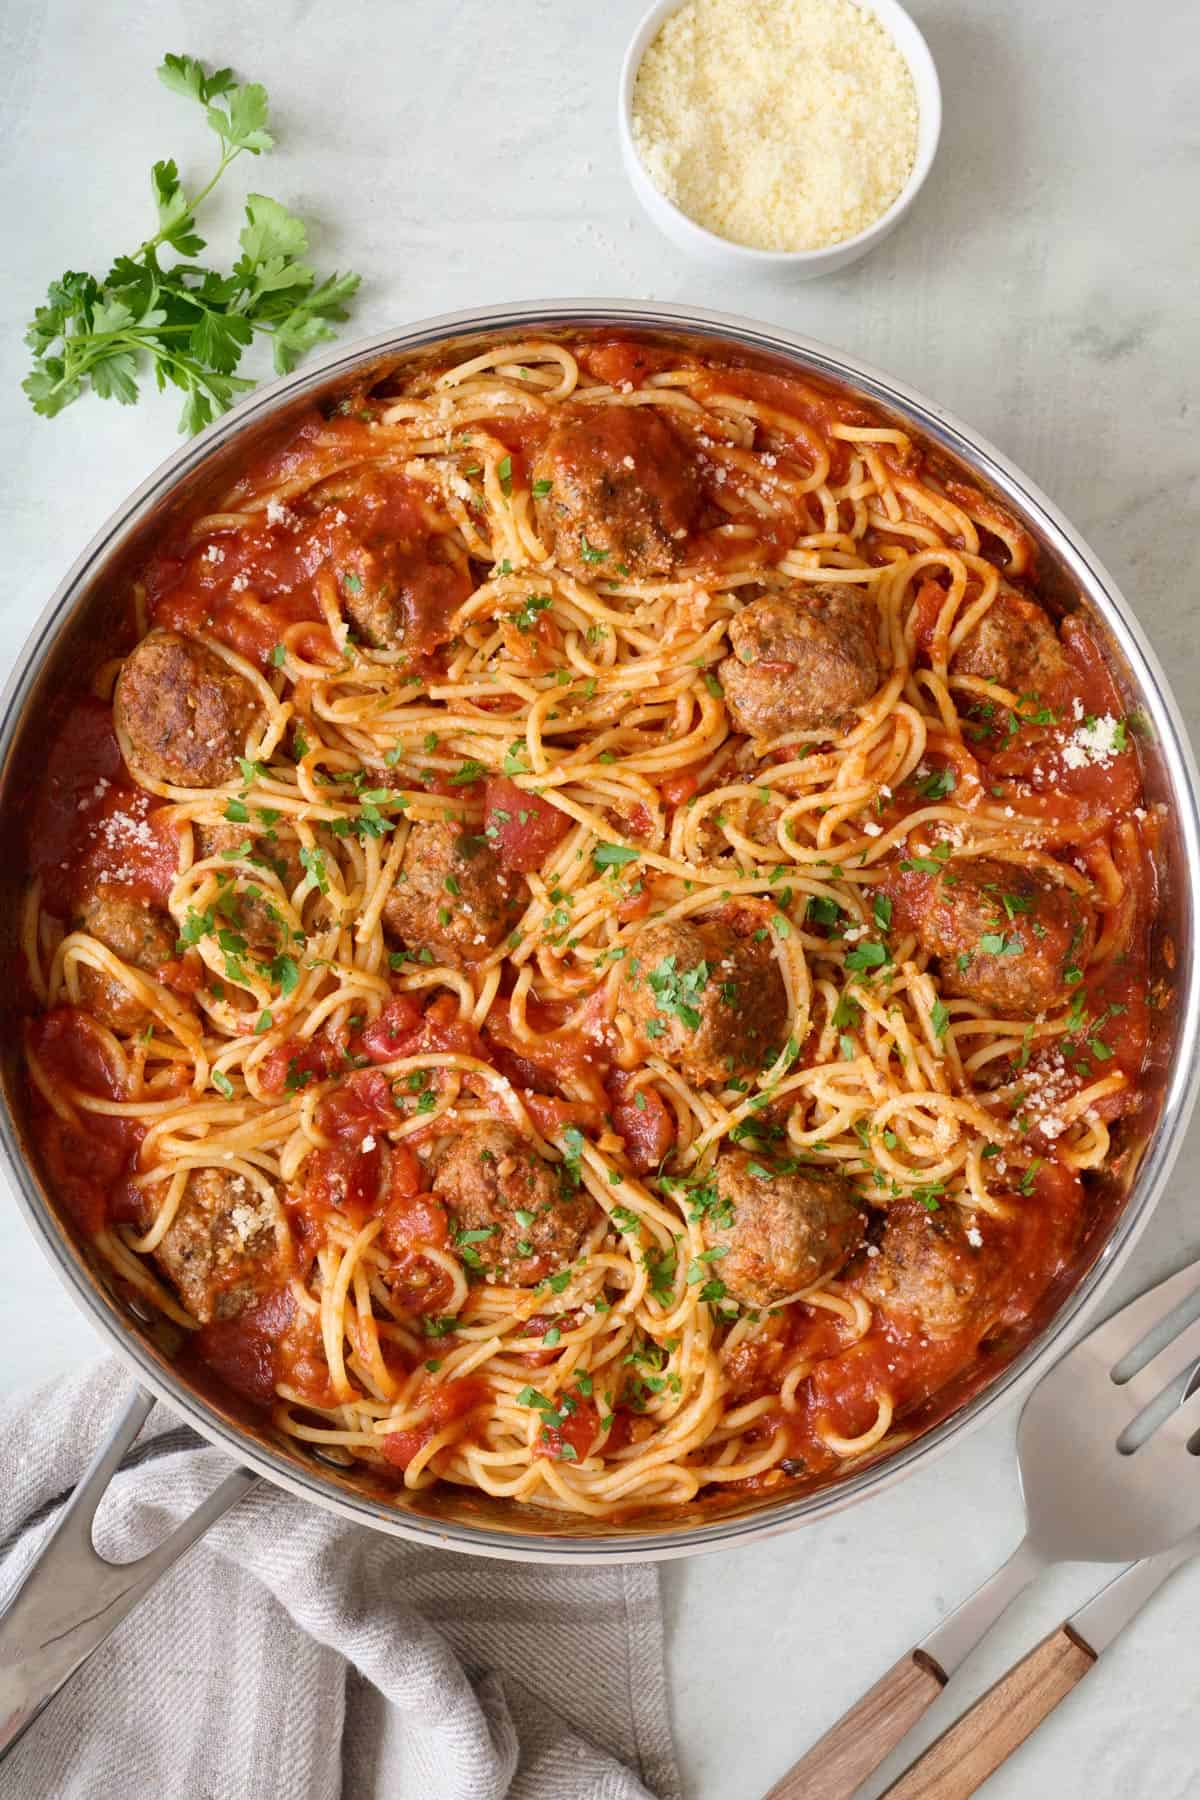 Spaghetti and meatballs in a skillet, garnished with fresh herbs and parmesan.